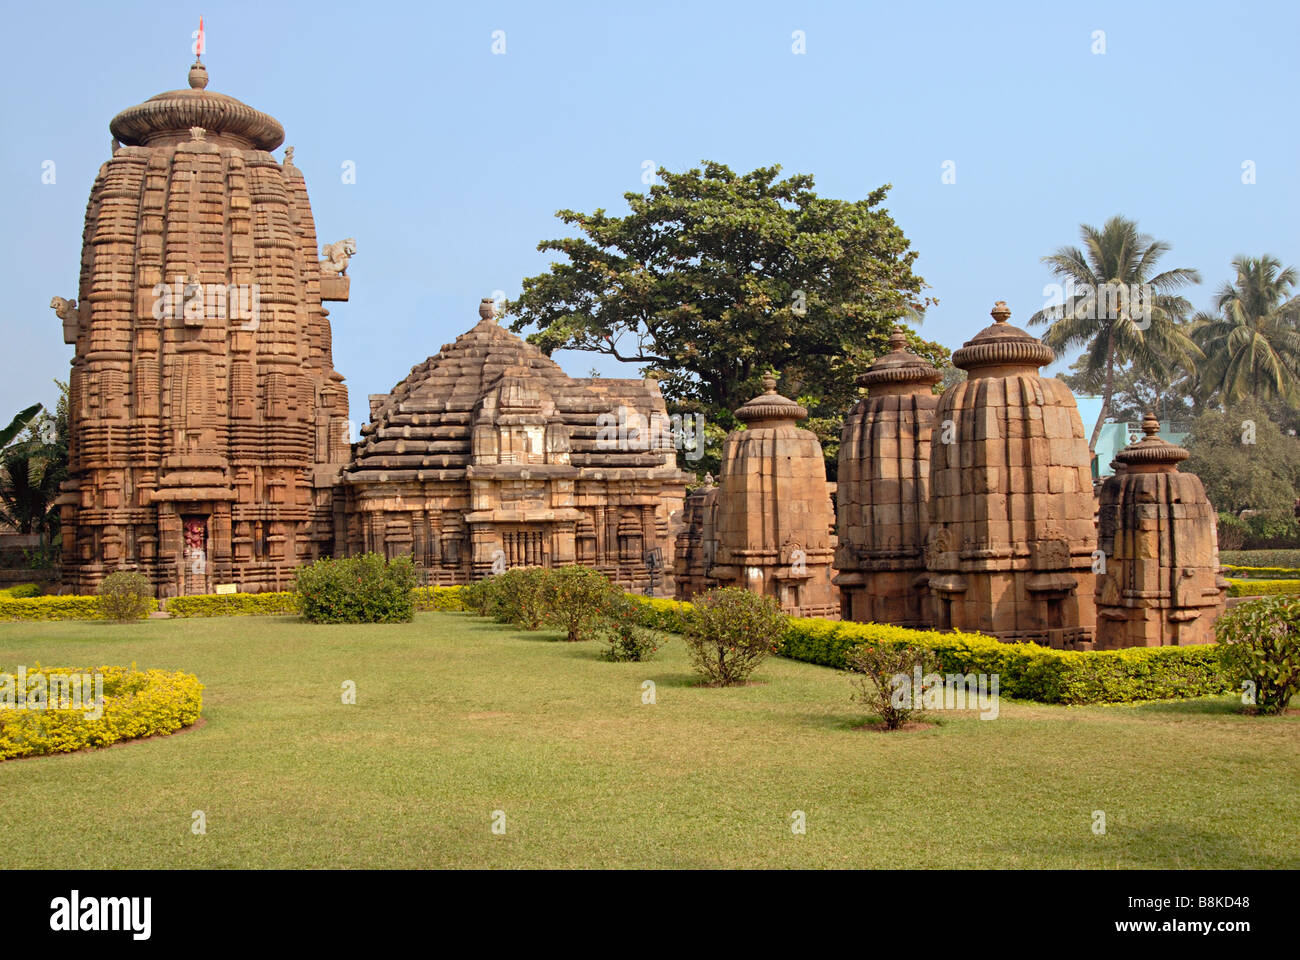 Siddheshwar temple- General-View from South, showing main temple and subsidiary shrines. Orissa, Bhubaneshwar, India. Stock Photo